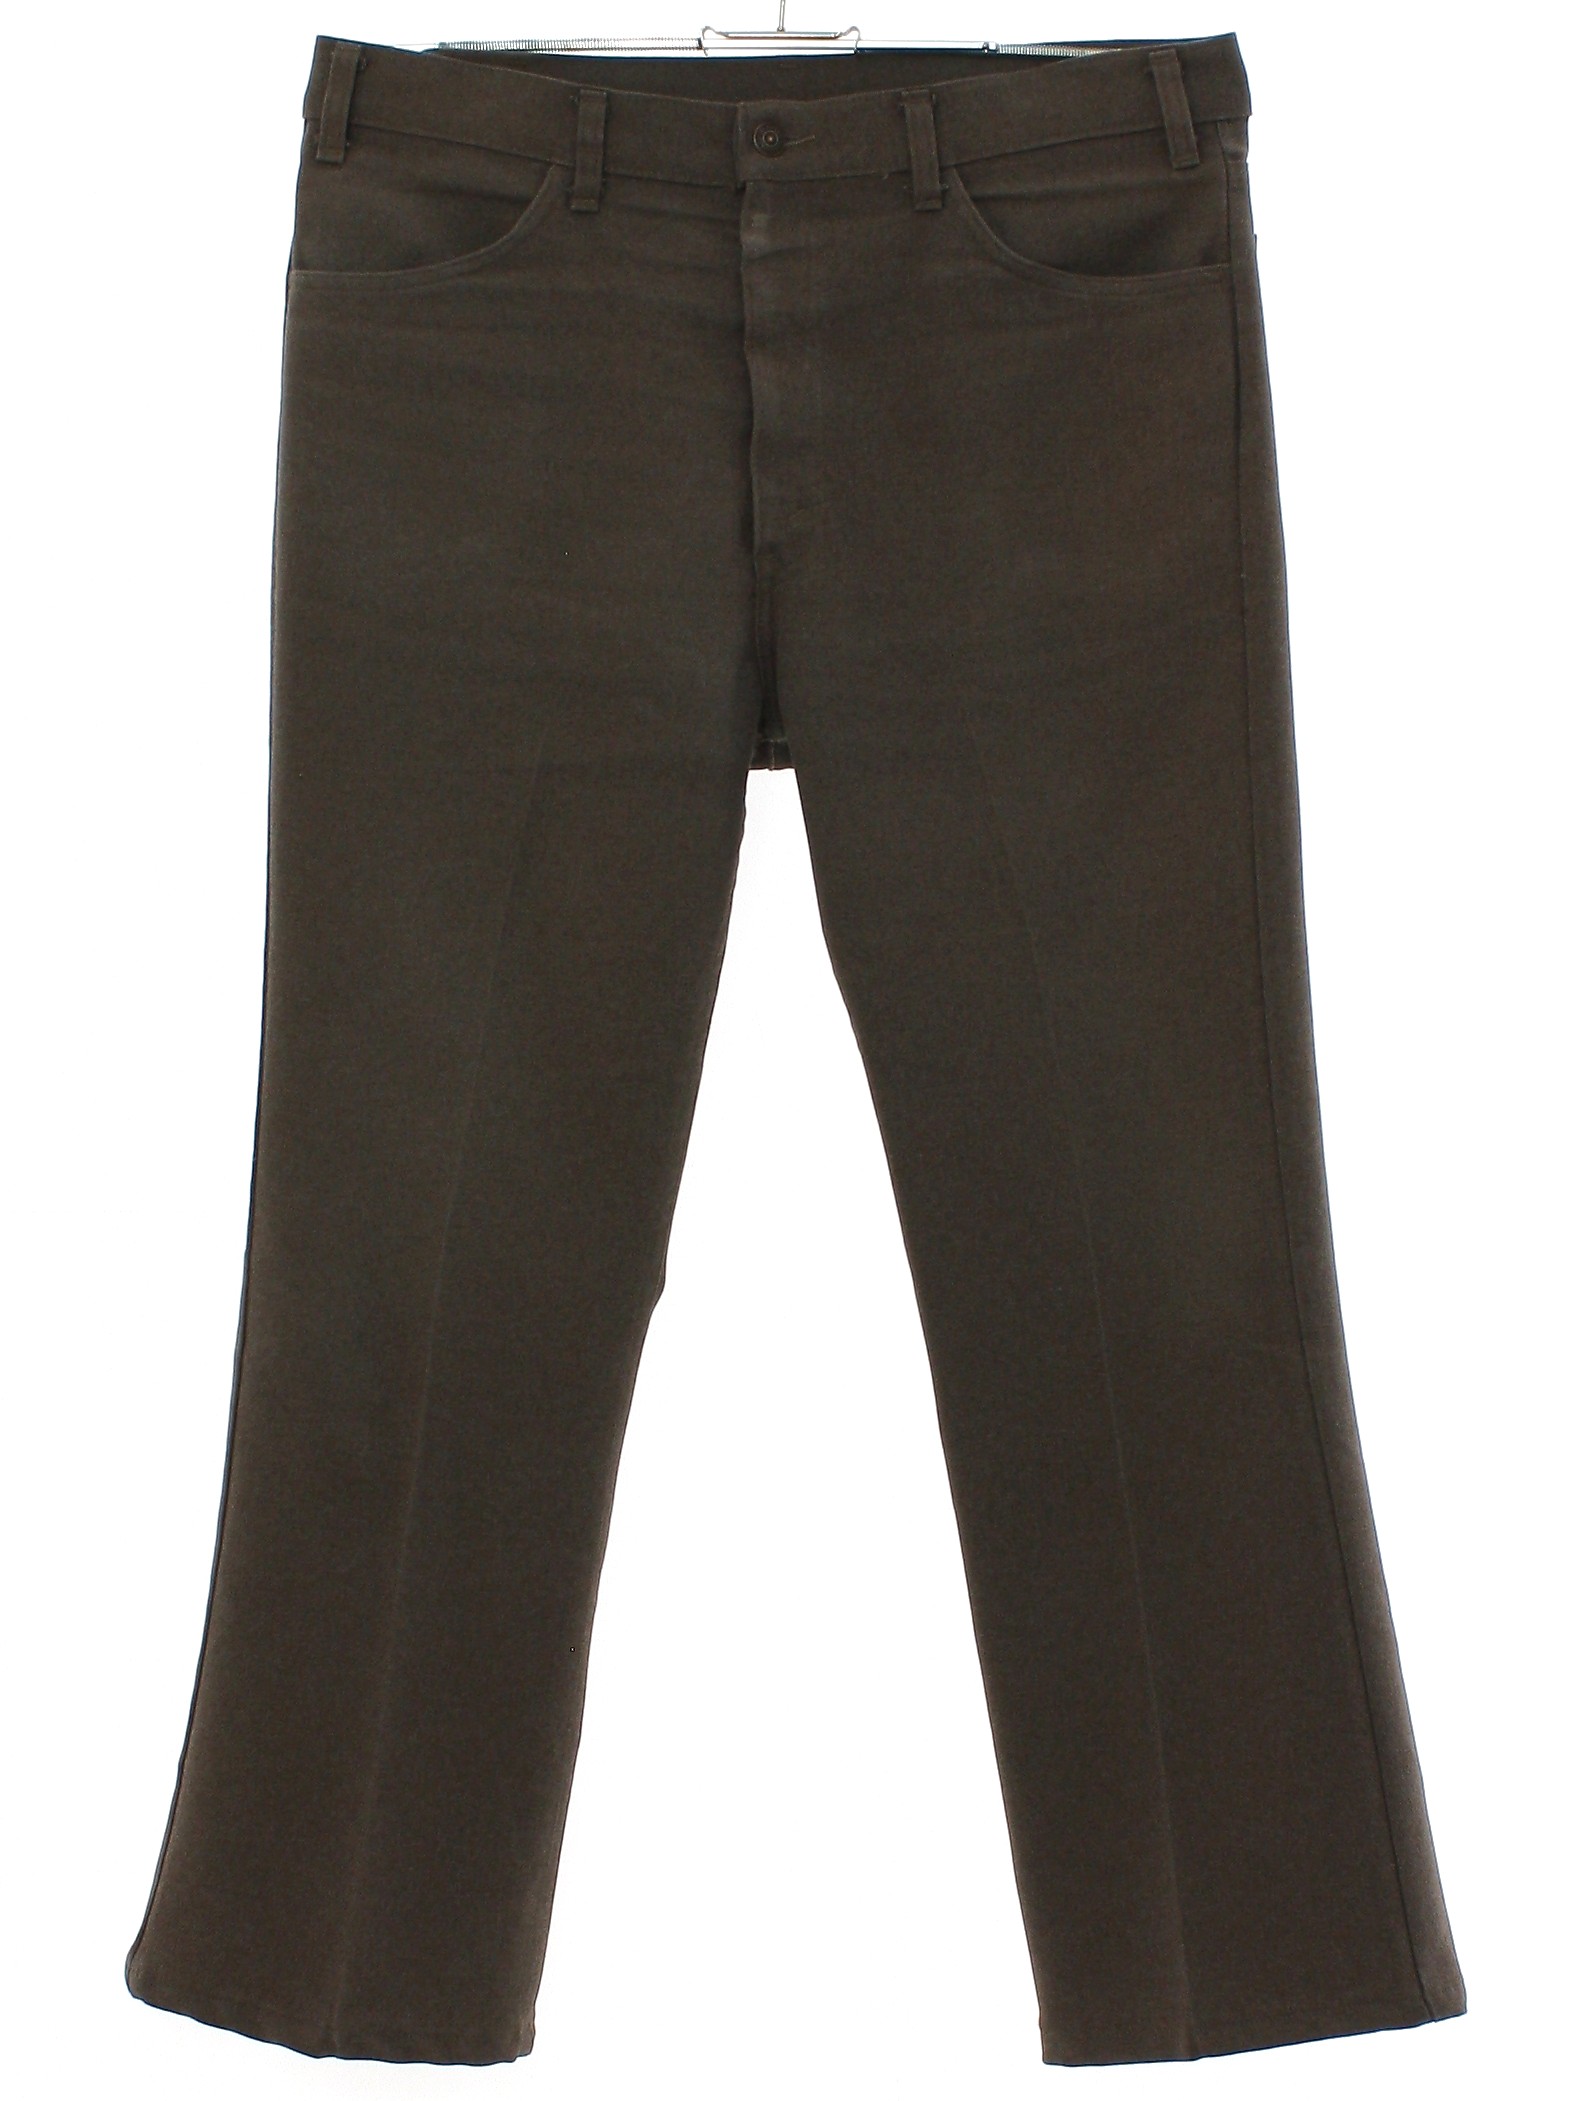 Retro 80s Flared Pants / Flares (Levis 517) : 80s -Levis 517- Mens cocoa  brown polyester levis flared jeans-cut pants with zipper fly closure with  button. Front scoop pockets and two rear